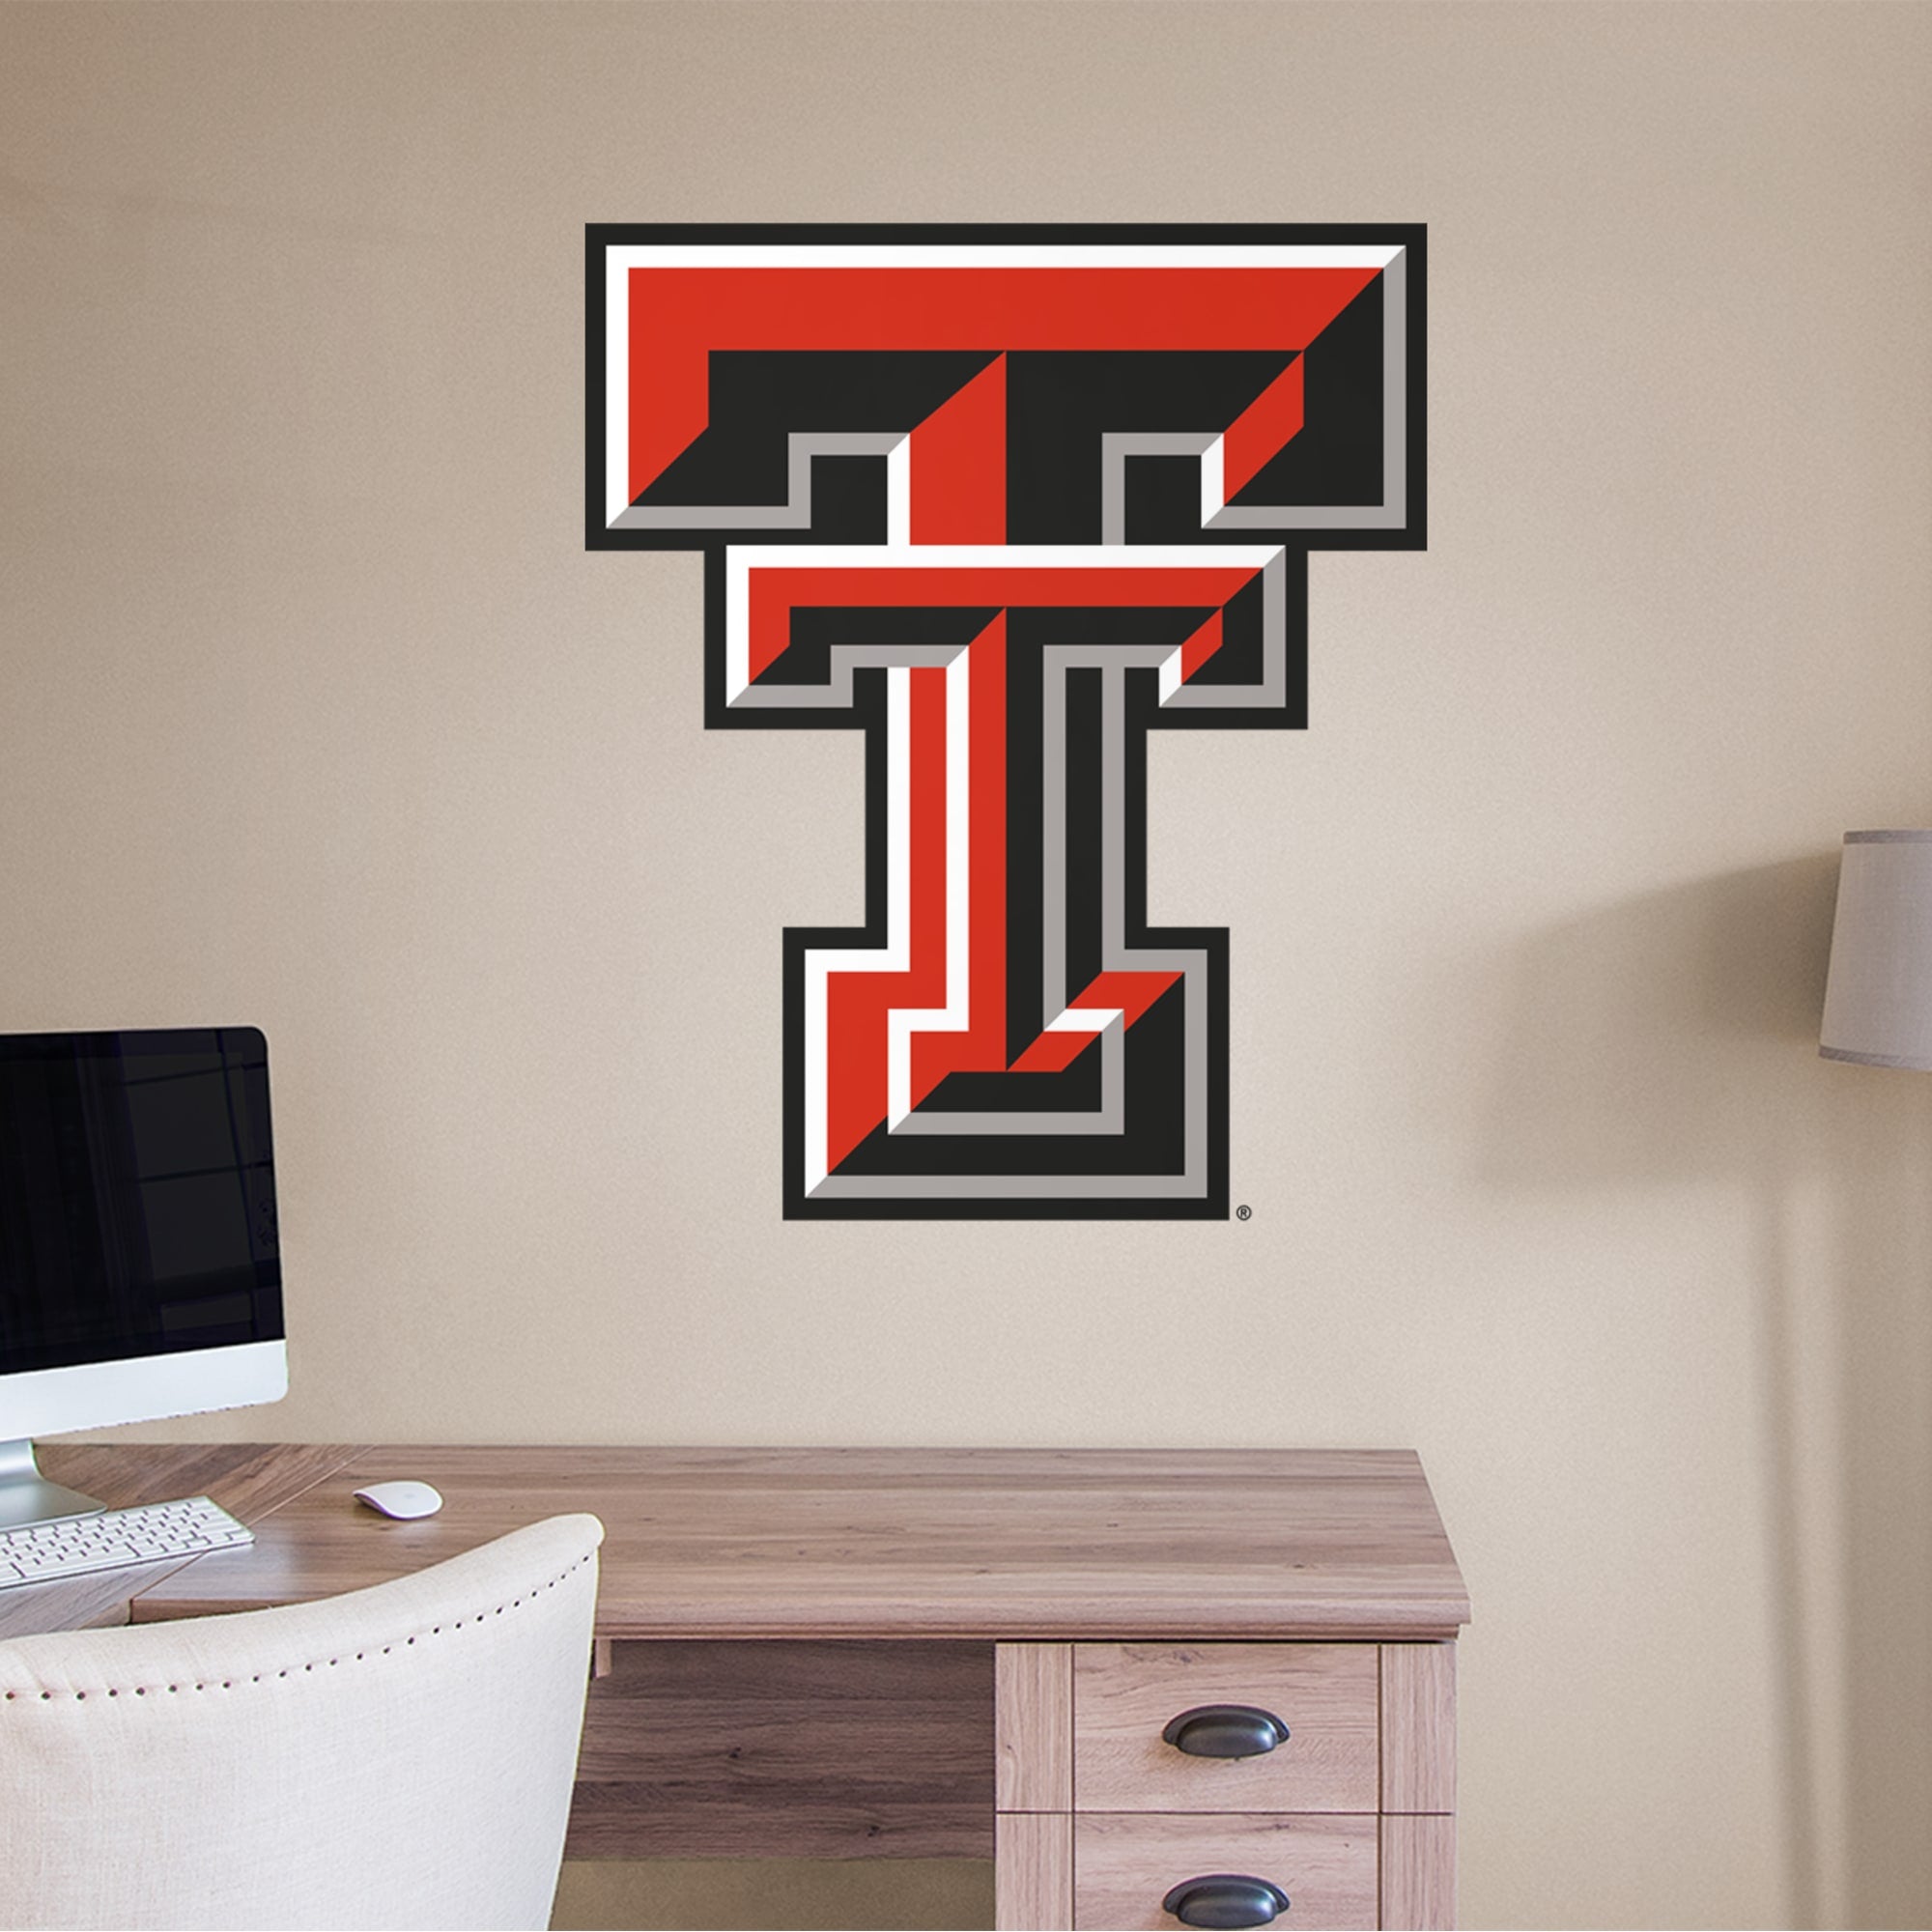 Texas Tech Red Raiders: Logo - Officially Licensed Removable Wall Decal 38.0"W x 45.0"H by Fathead | Vinyl